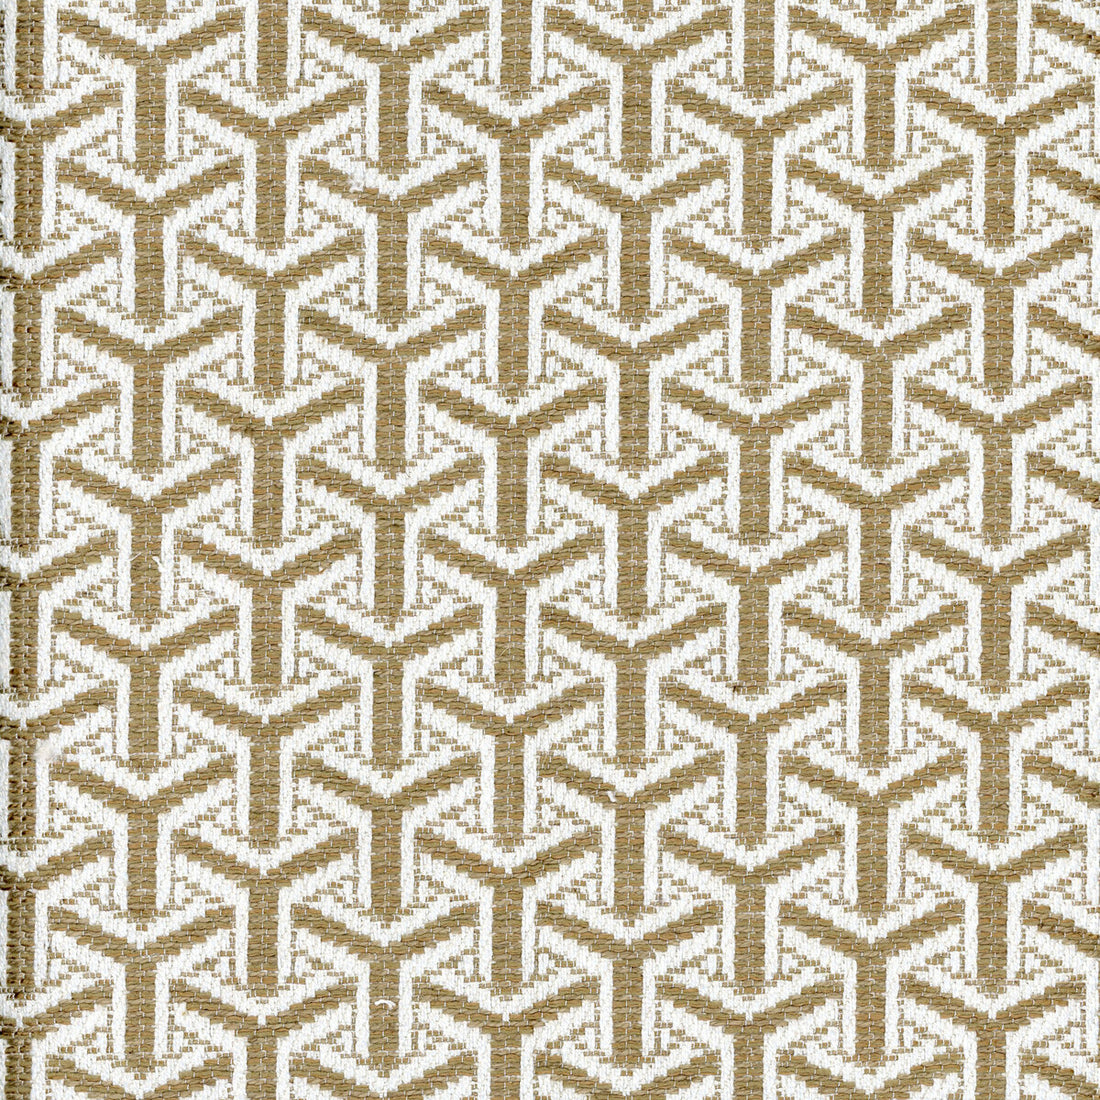 Monte fabric in almond color - pattern AM100343.6.0 - by Kravet Couture in the Andrew Martin Salento collection